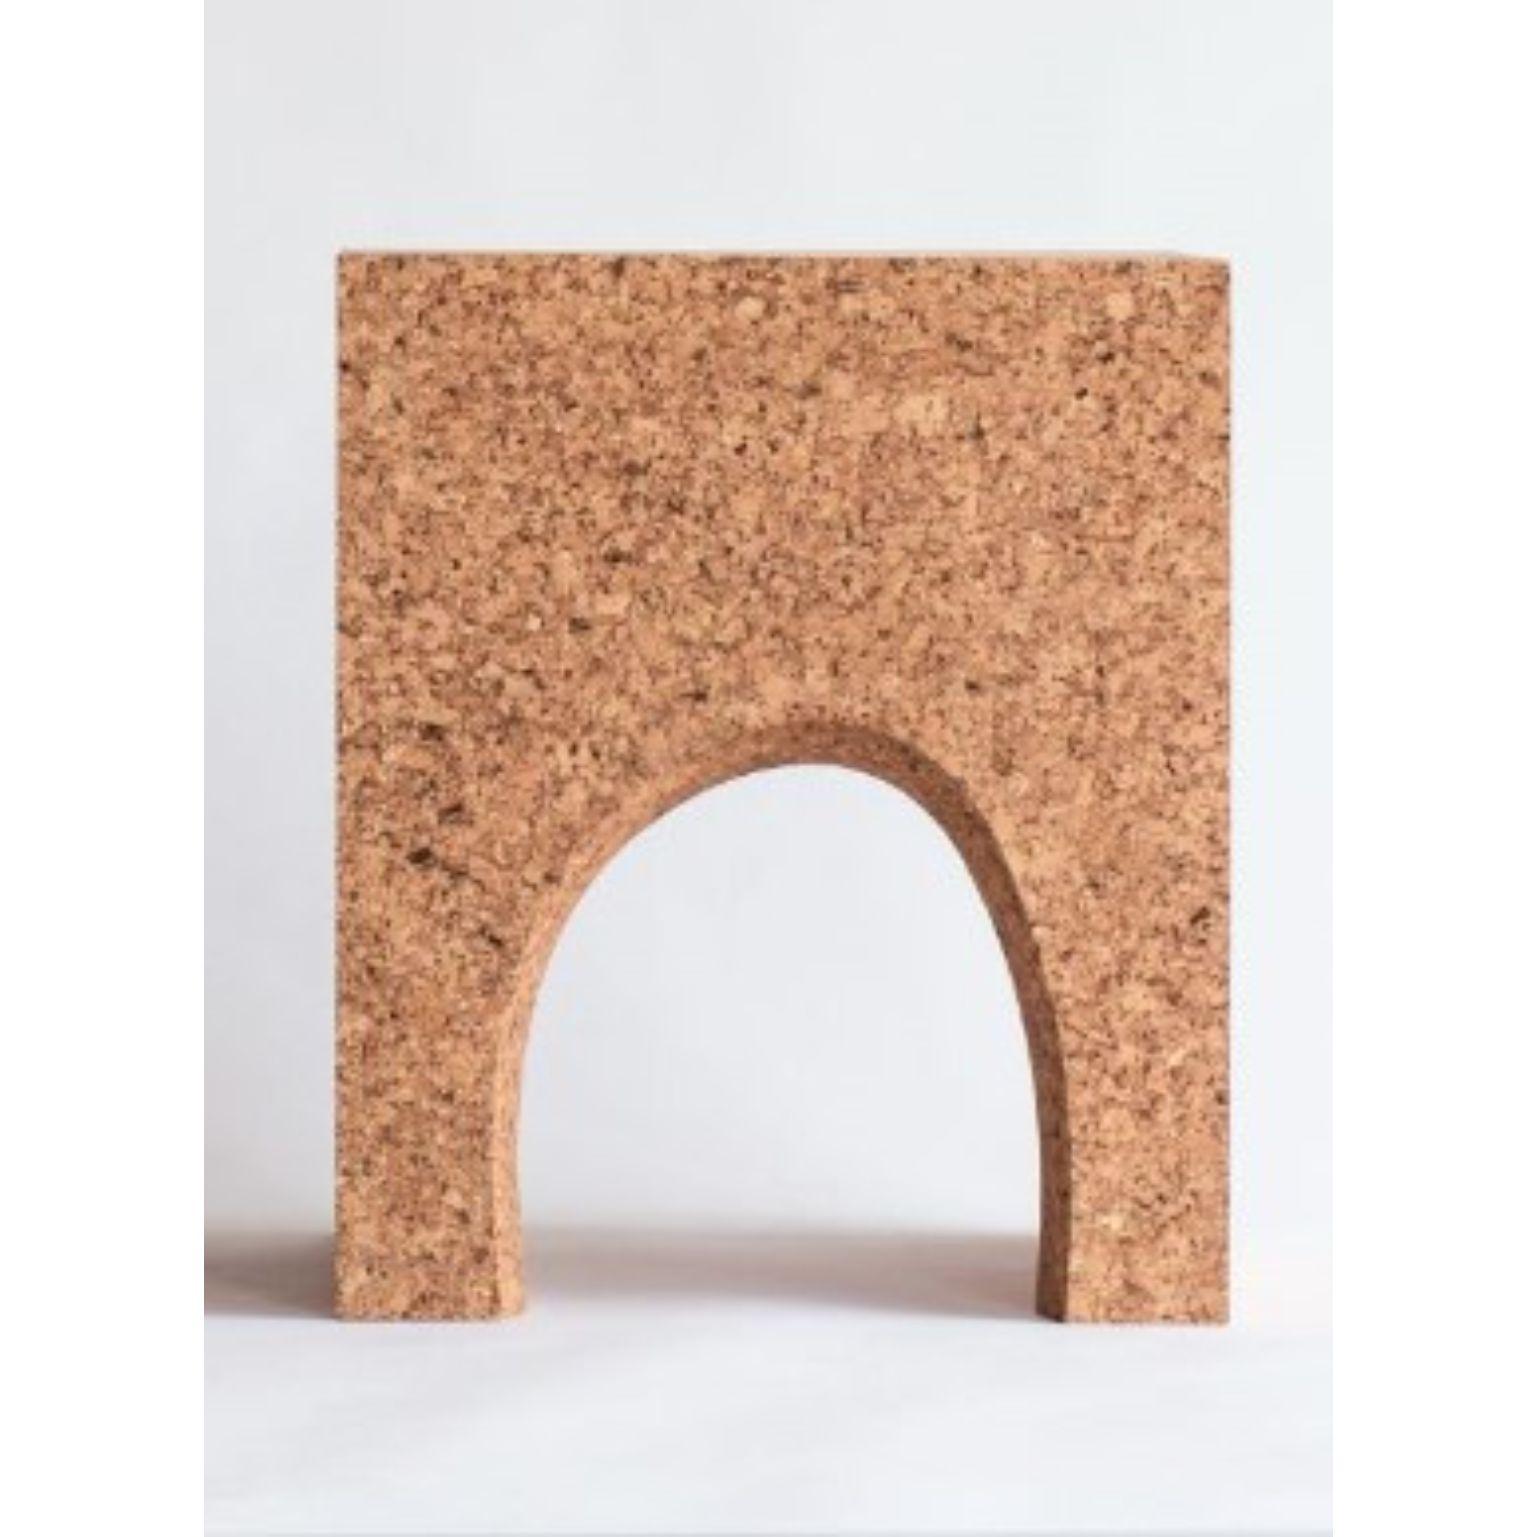 Void 03 by DMNTS Design
Dimensions: 42 x 39 x 50 cm
Materials: Quercus suber cork
Unique Piece

Also available in set of two

Void 03 is a multipurpose object based on the analysis of the void space of the “domus de janas” Genna Salixi, an